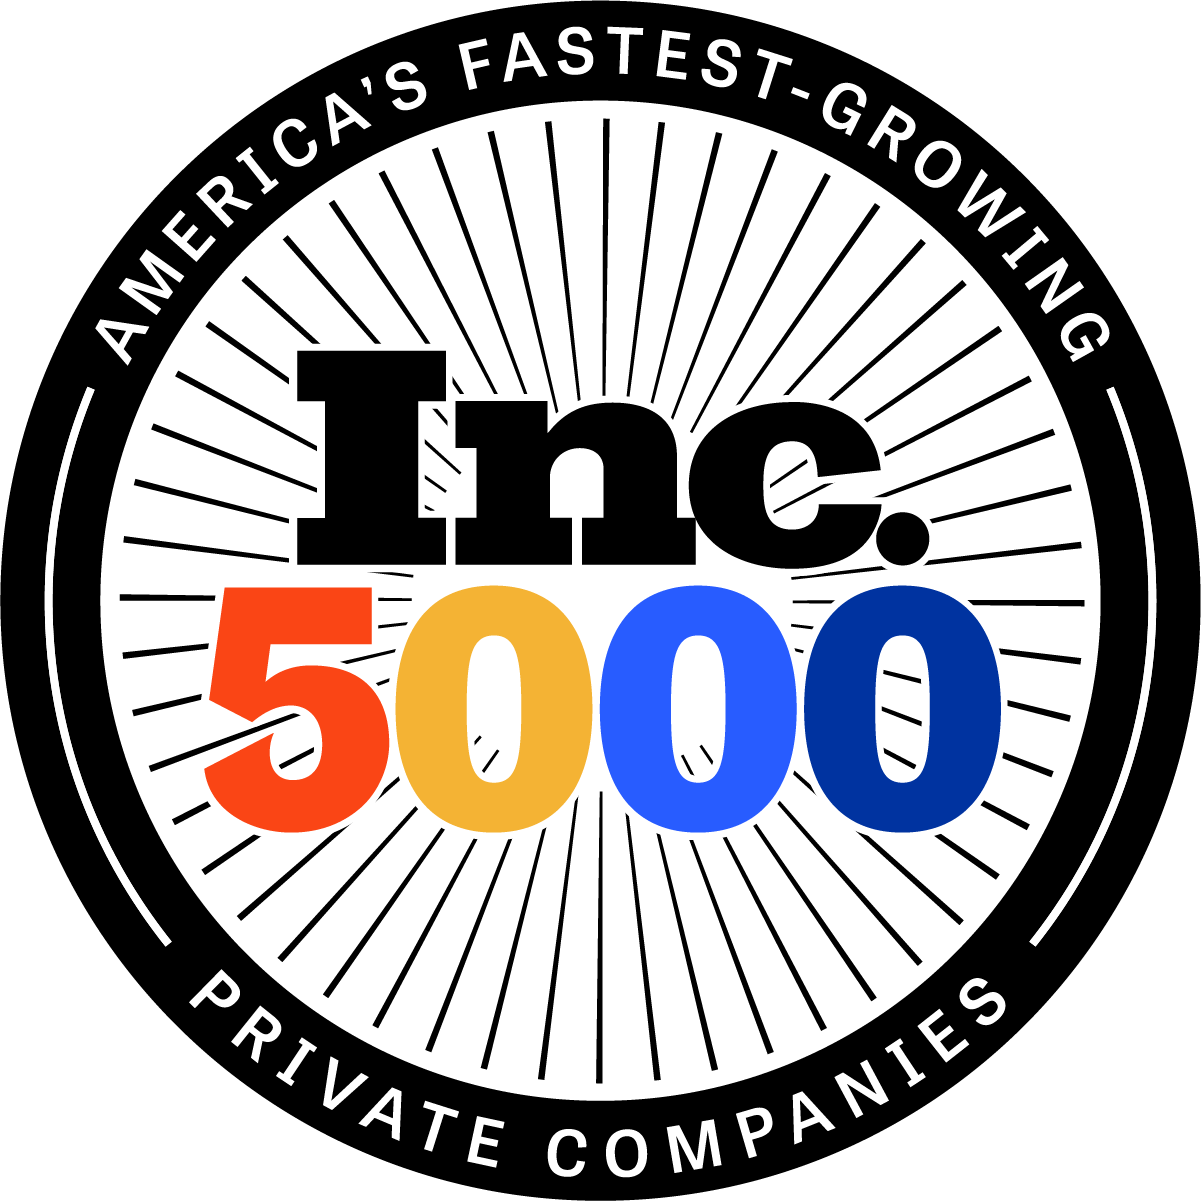 Wizeline Named to Inc. 5000 List of America’s Fastest-Growing Private Companies for Third Consecutive Year